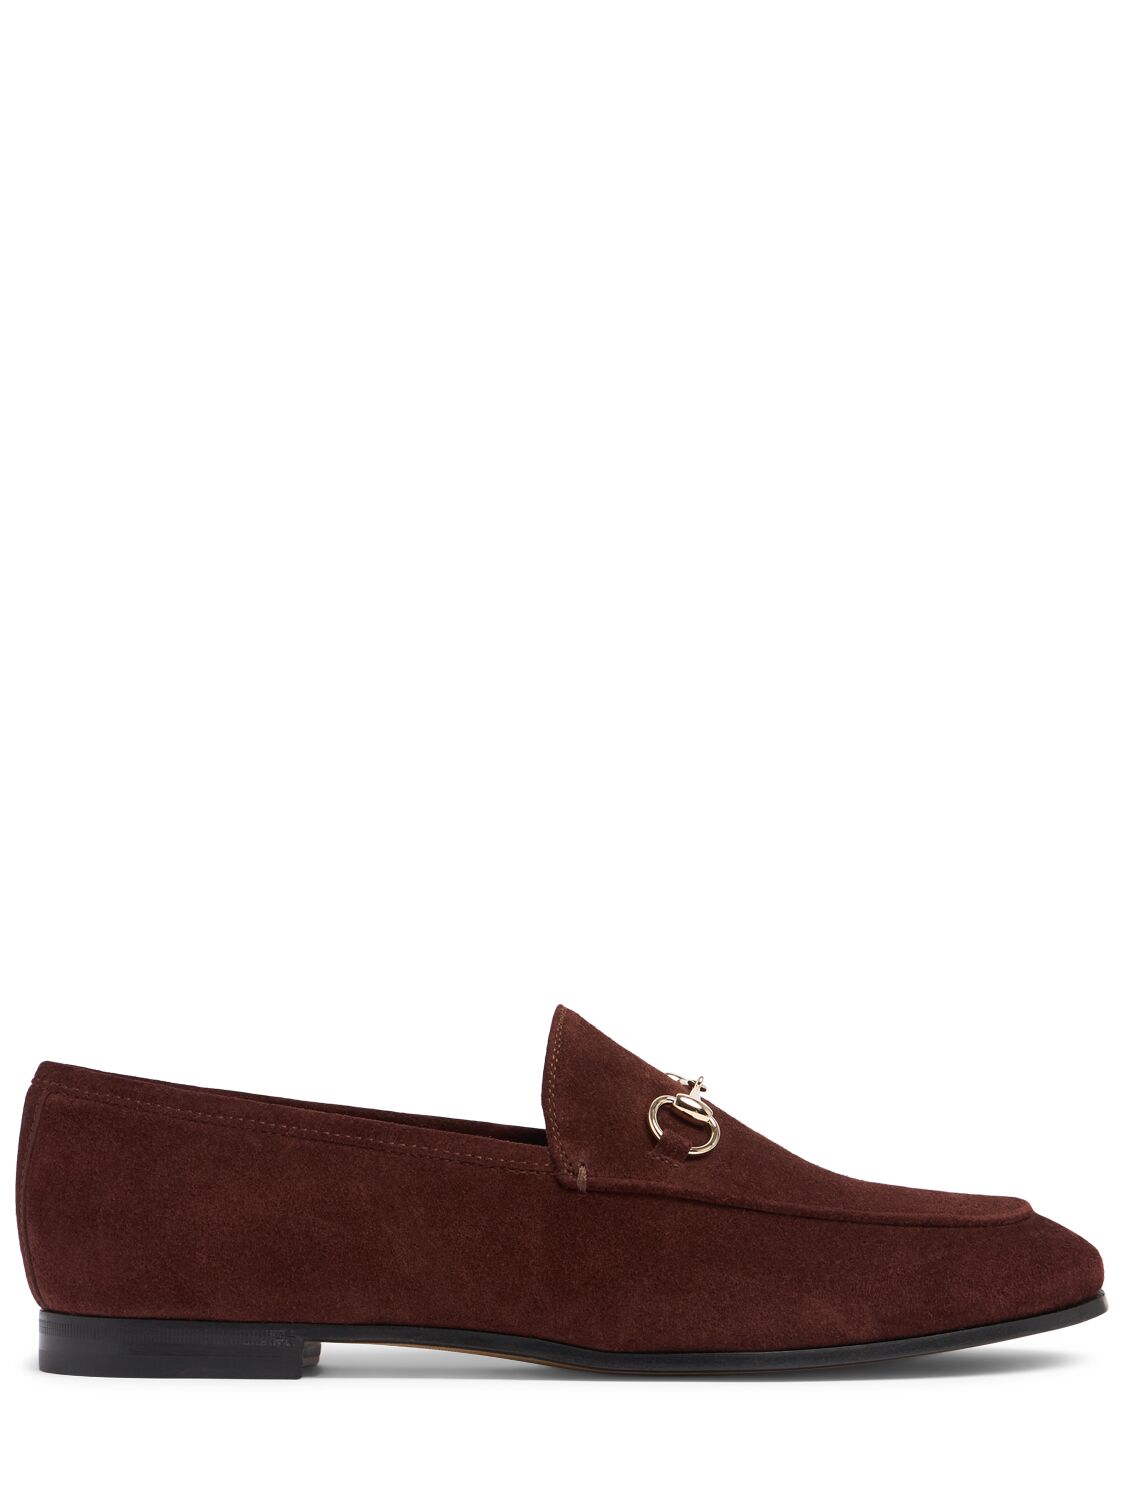 Gucci 10mm Jordaan Suede Loafers In New Chocolate